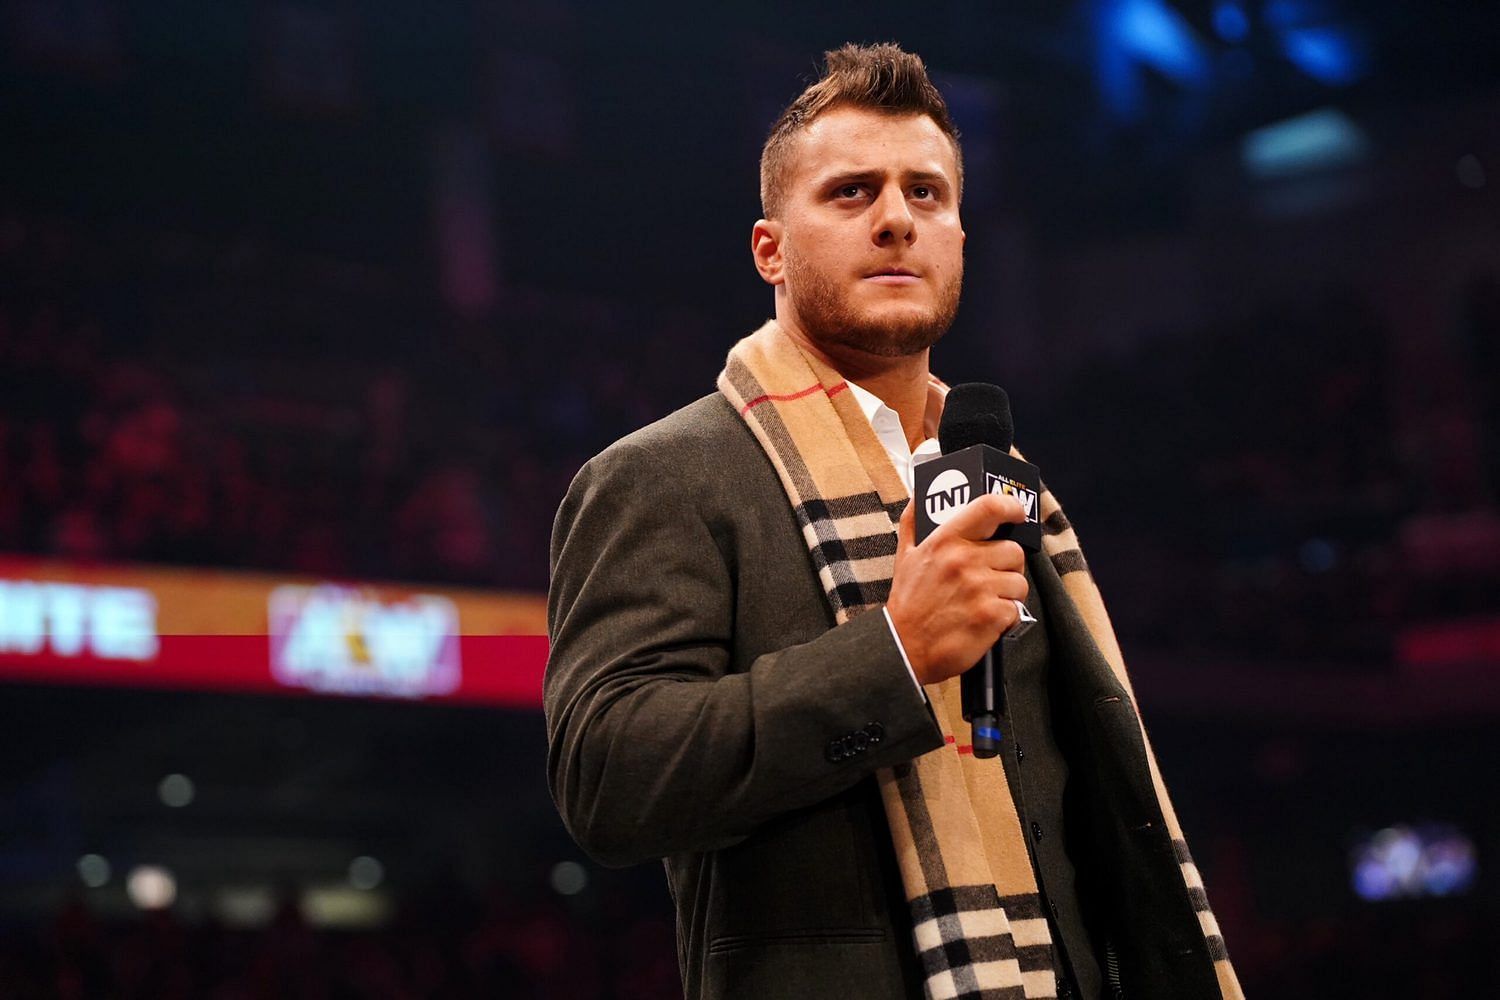 AEW star MJF has been on a roll lately